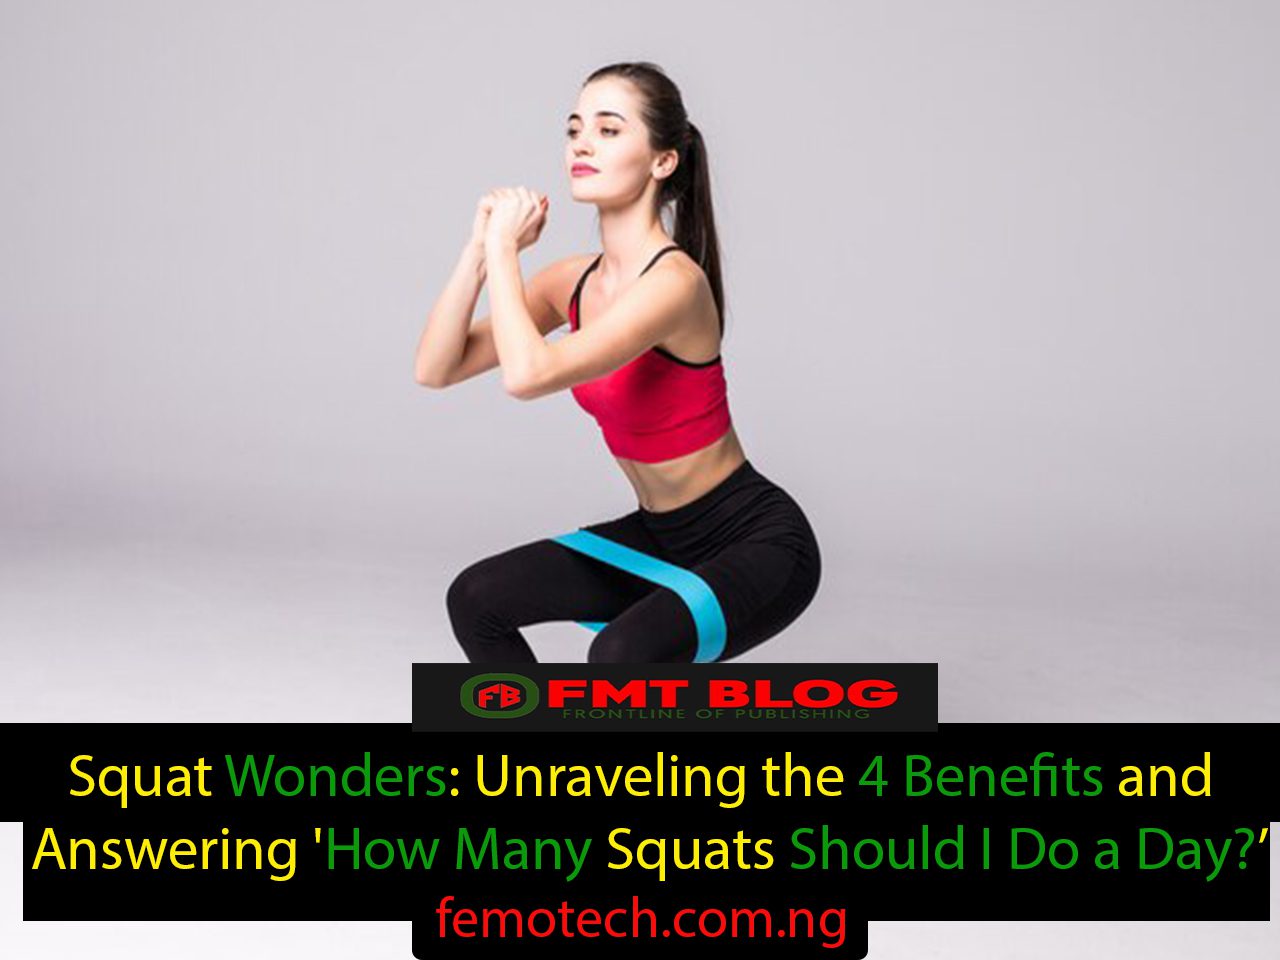 Squats Wonders: Unraveling the 4 Benefits and Answering ‘How Many Squats Should I Do a Day?